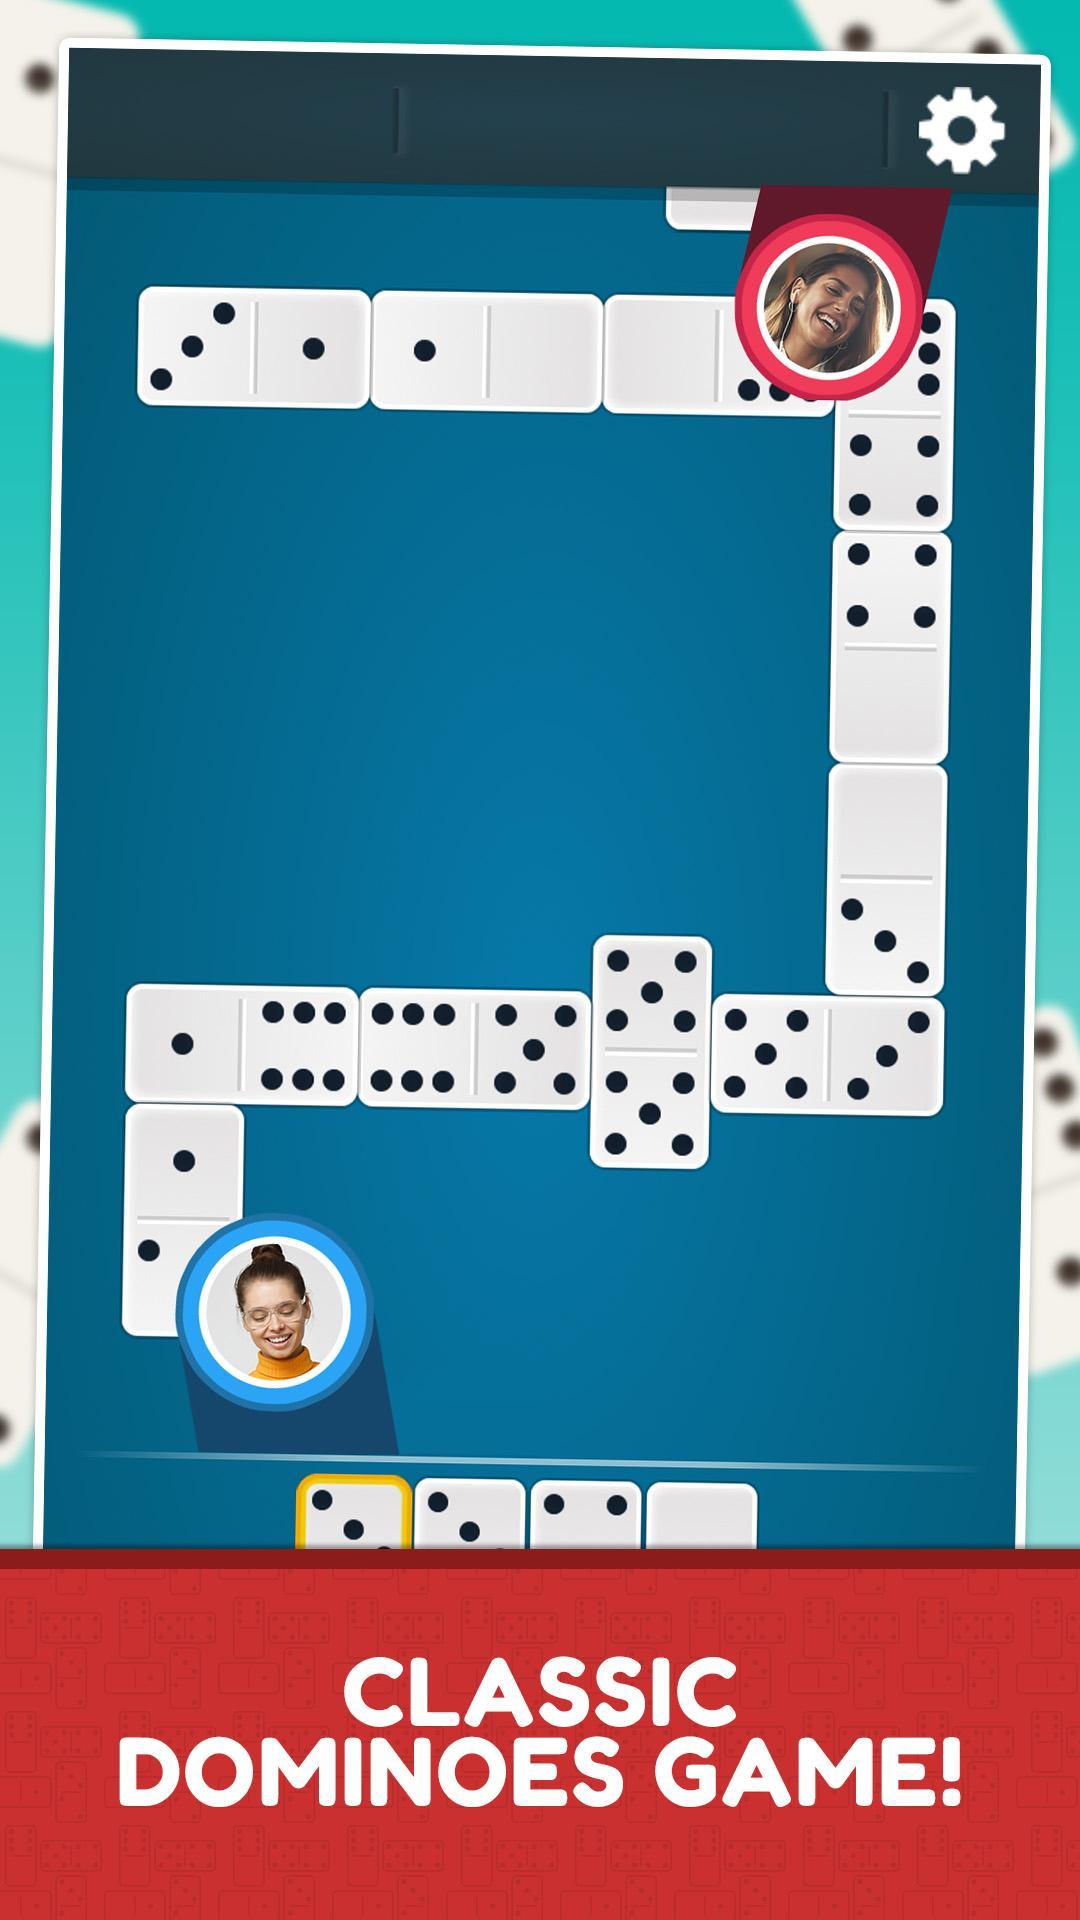 Dominos Online Game for Android - APK